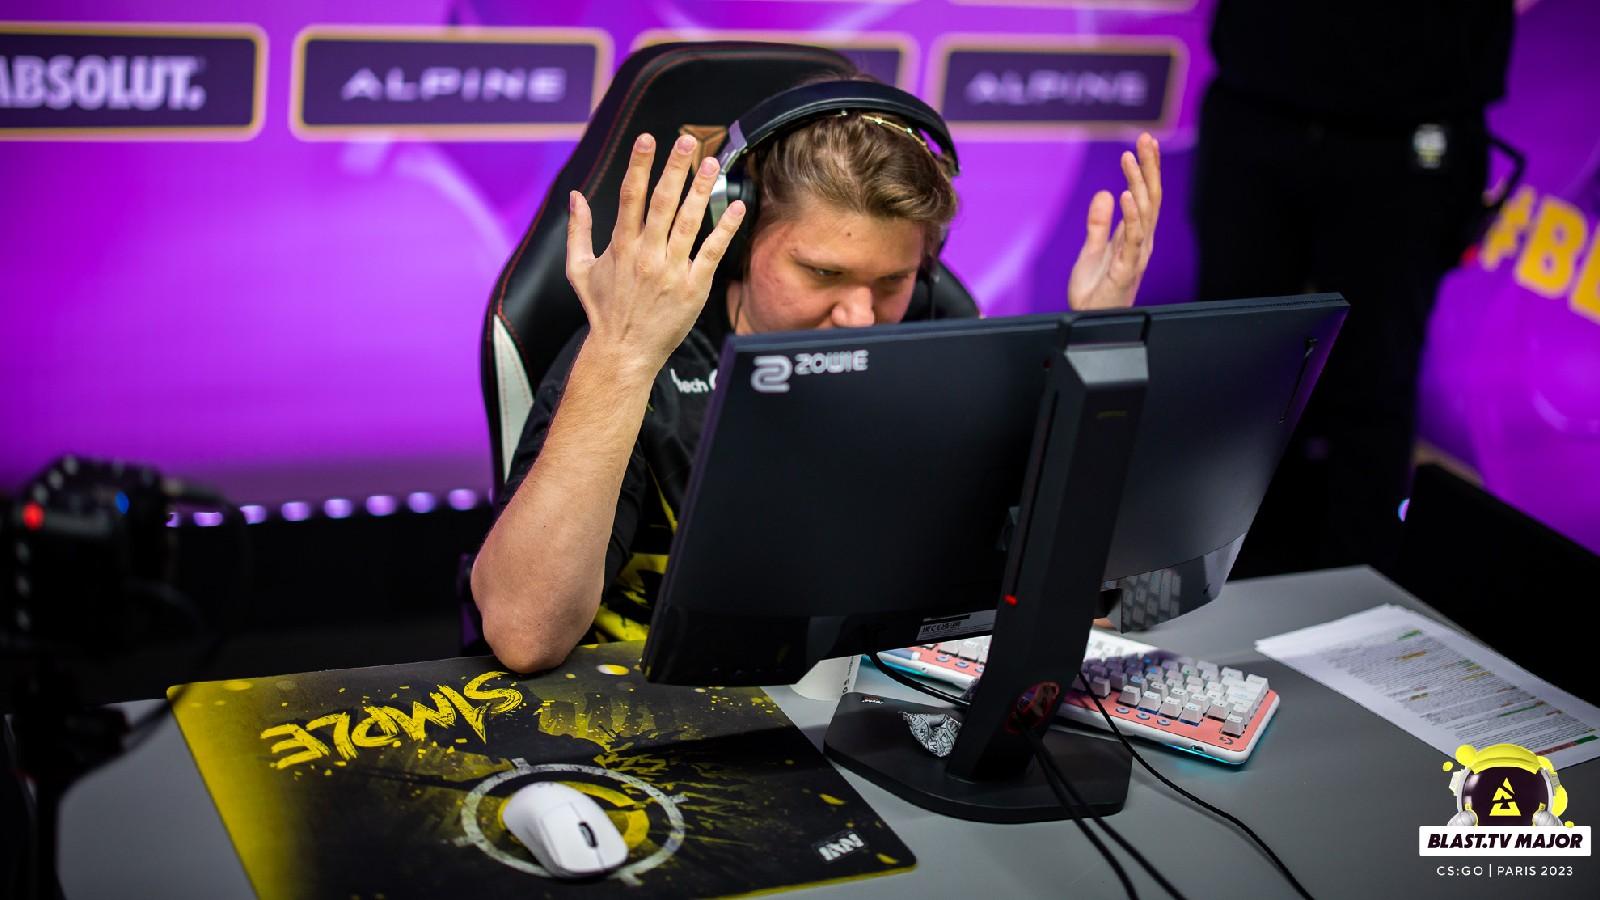 S1mple is HLTV.org's 2021 Player of the Year